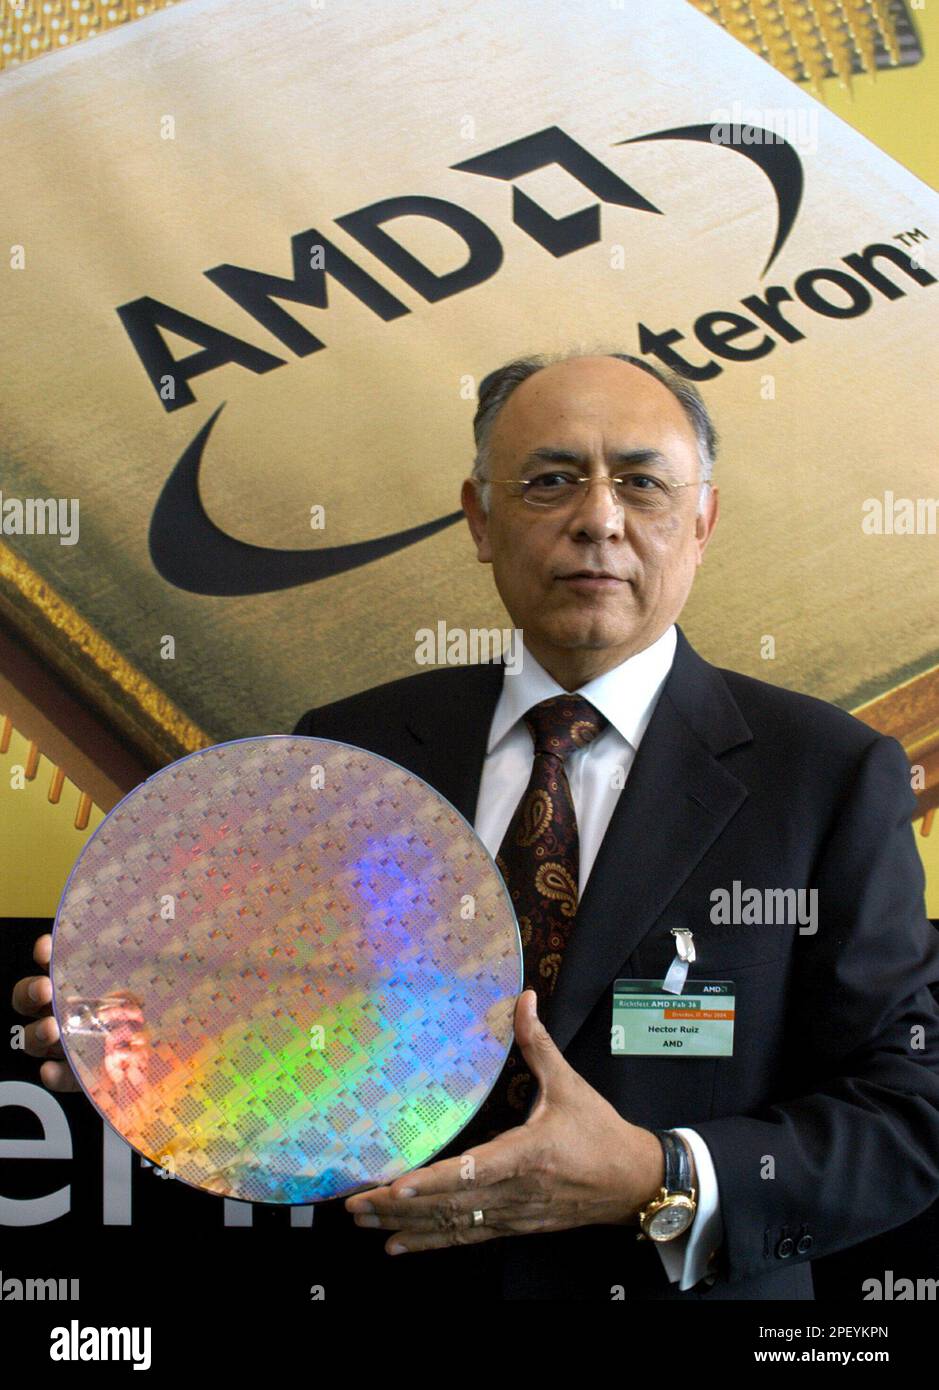 Hector Ruiz, Chairman of the Board and CEO of AMD, Advanced Micro Devices, poses with a 300 Millimeter wafer prior to the beginning of the topping-off ceremony for AMD`s extension wing Fab 36, in Dresden, Germany, Monday, May 17, 2004. AMD, a global semiconductor company, based in Sunnyvale, Calif., opened its biggest wafer production line, the Fab 30, outside the U.S. in Dresden in 1999 and is celebrating the topping-off of the new Fab 36 hall on Monday. (AP photo/Matthias Rietschel) Stock Photo